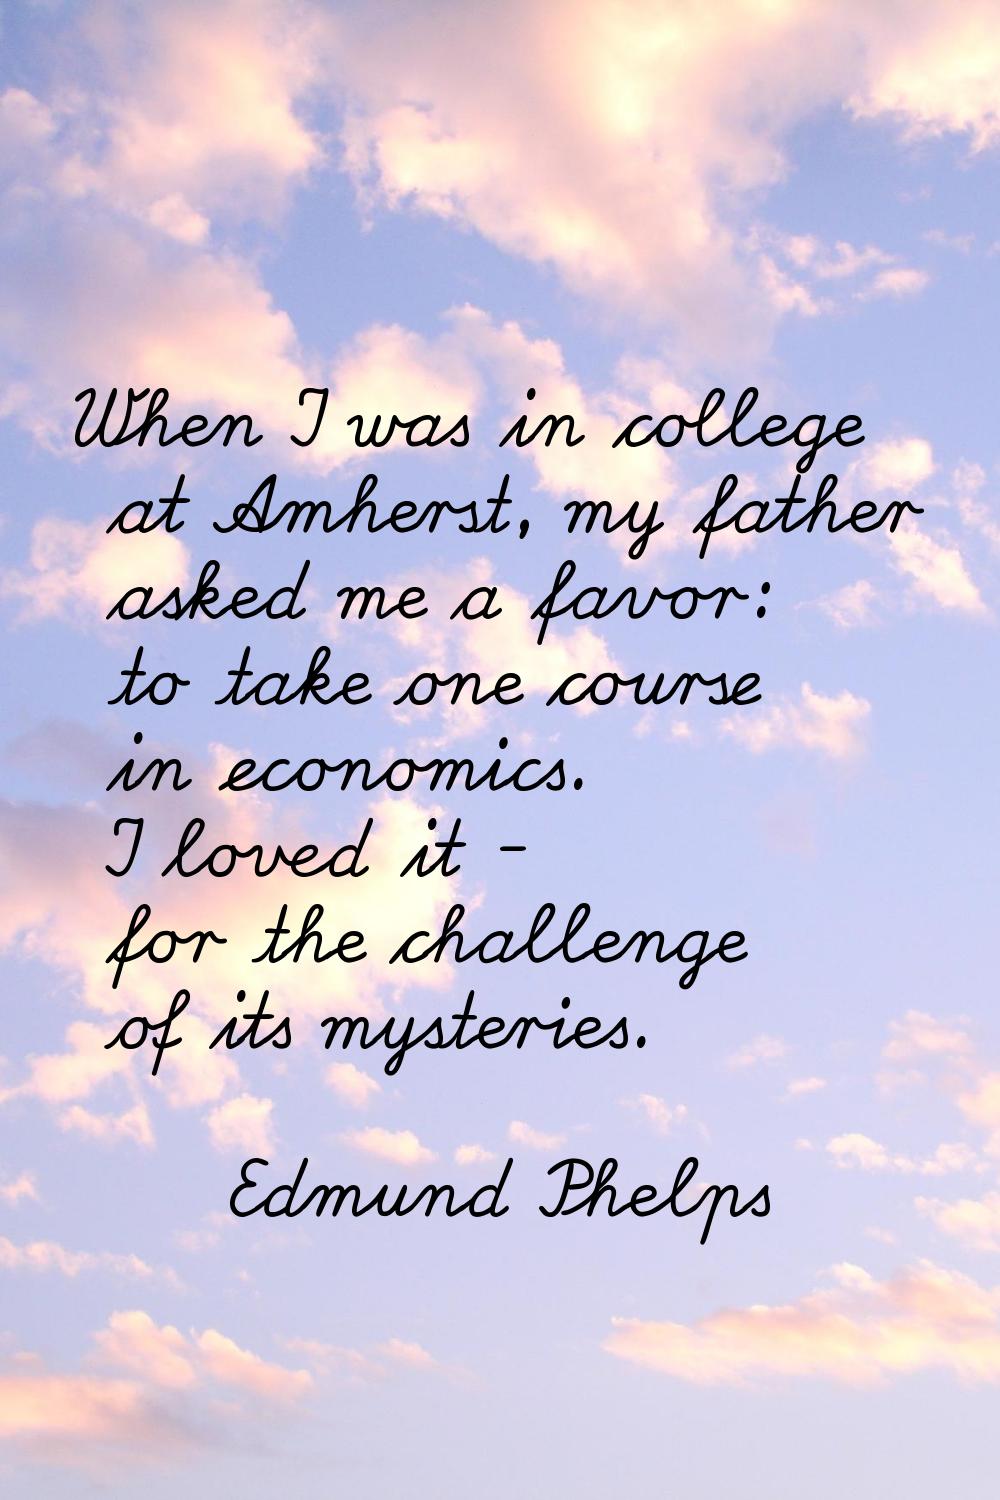 When I was in college at Amherst, my father asked me a favor: to take one course in economics. I lo